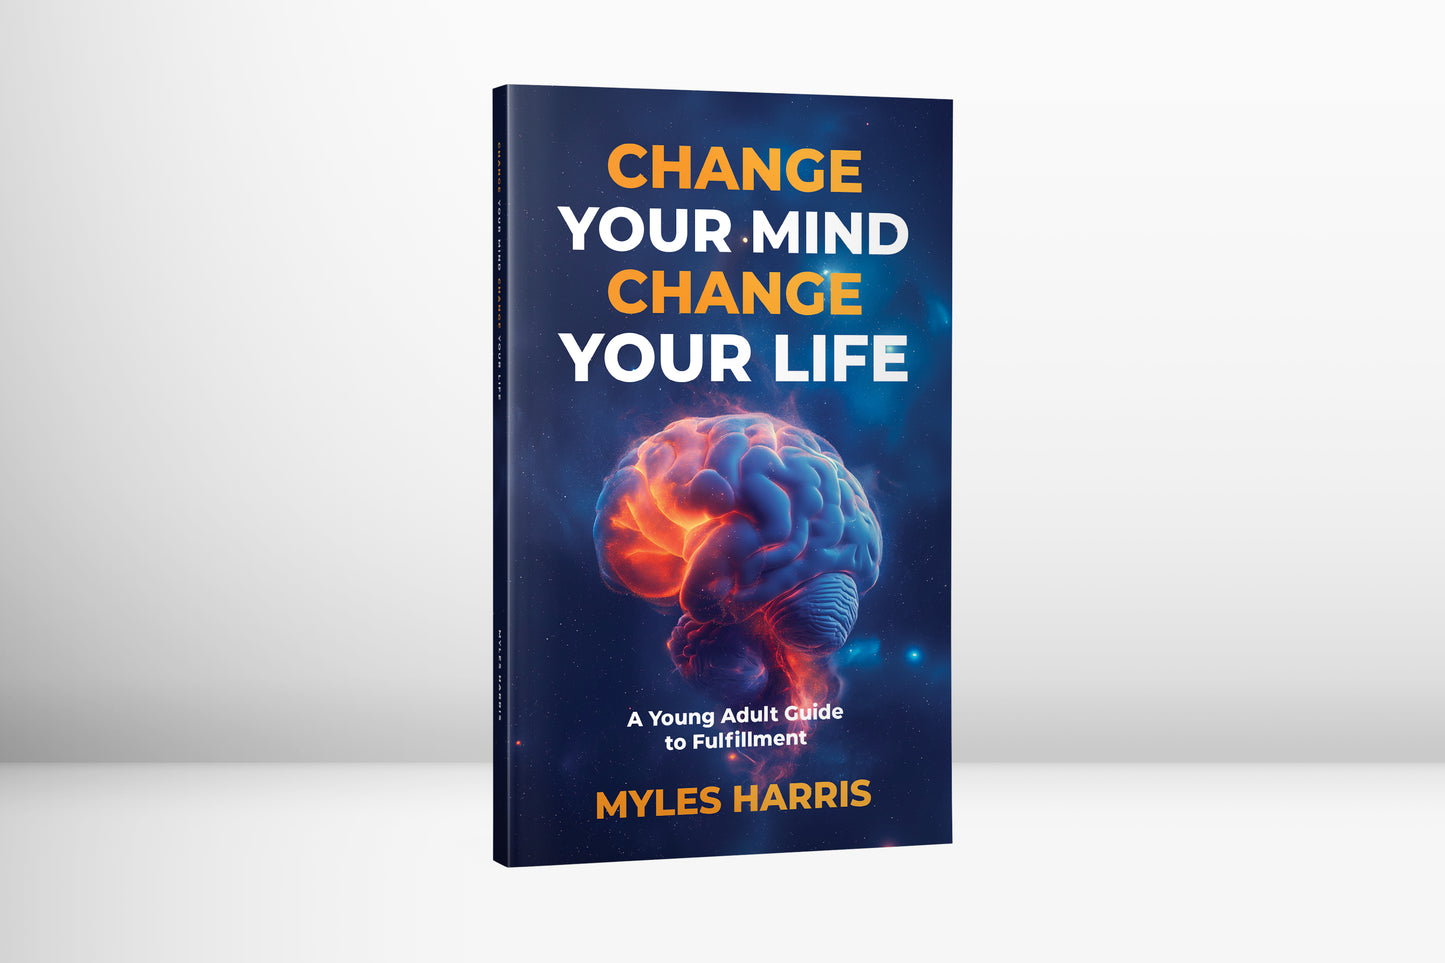 Change Your Mind, Change Your Life- A Young Adult Guide to Fulfillment